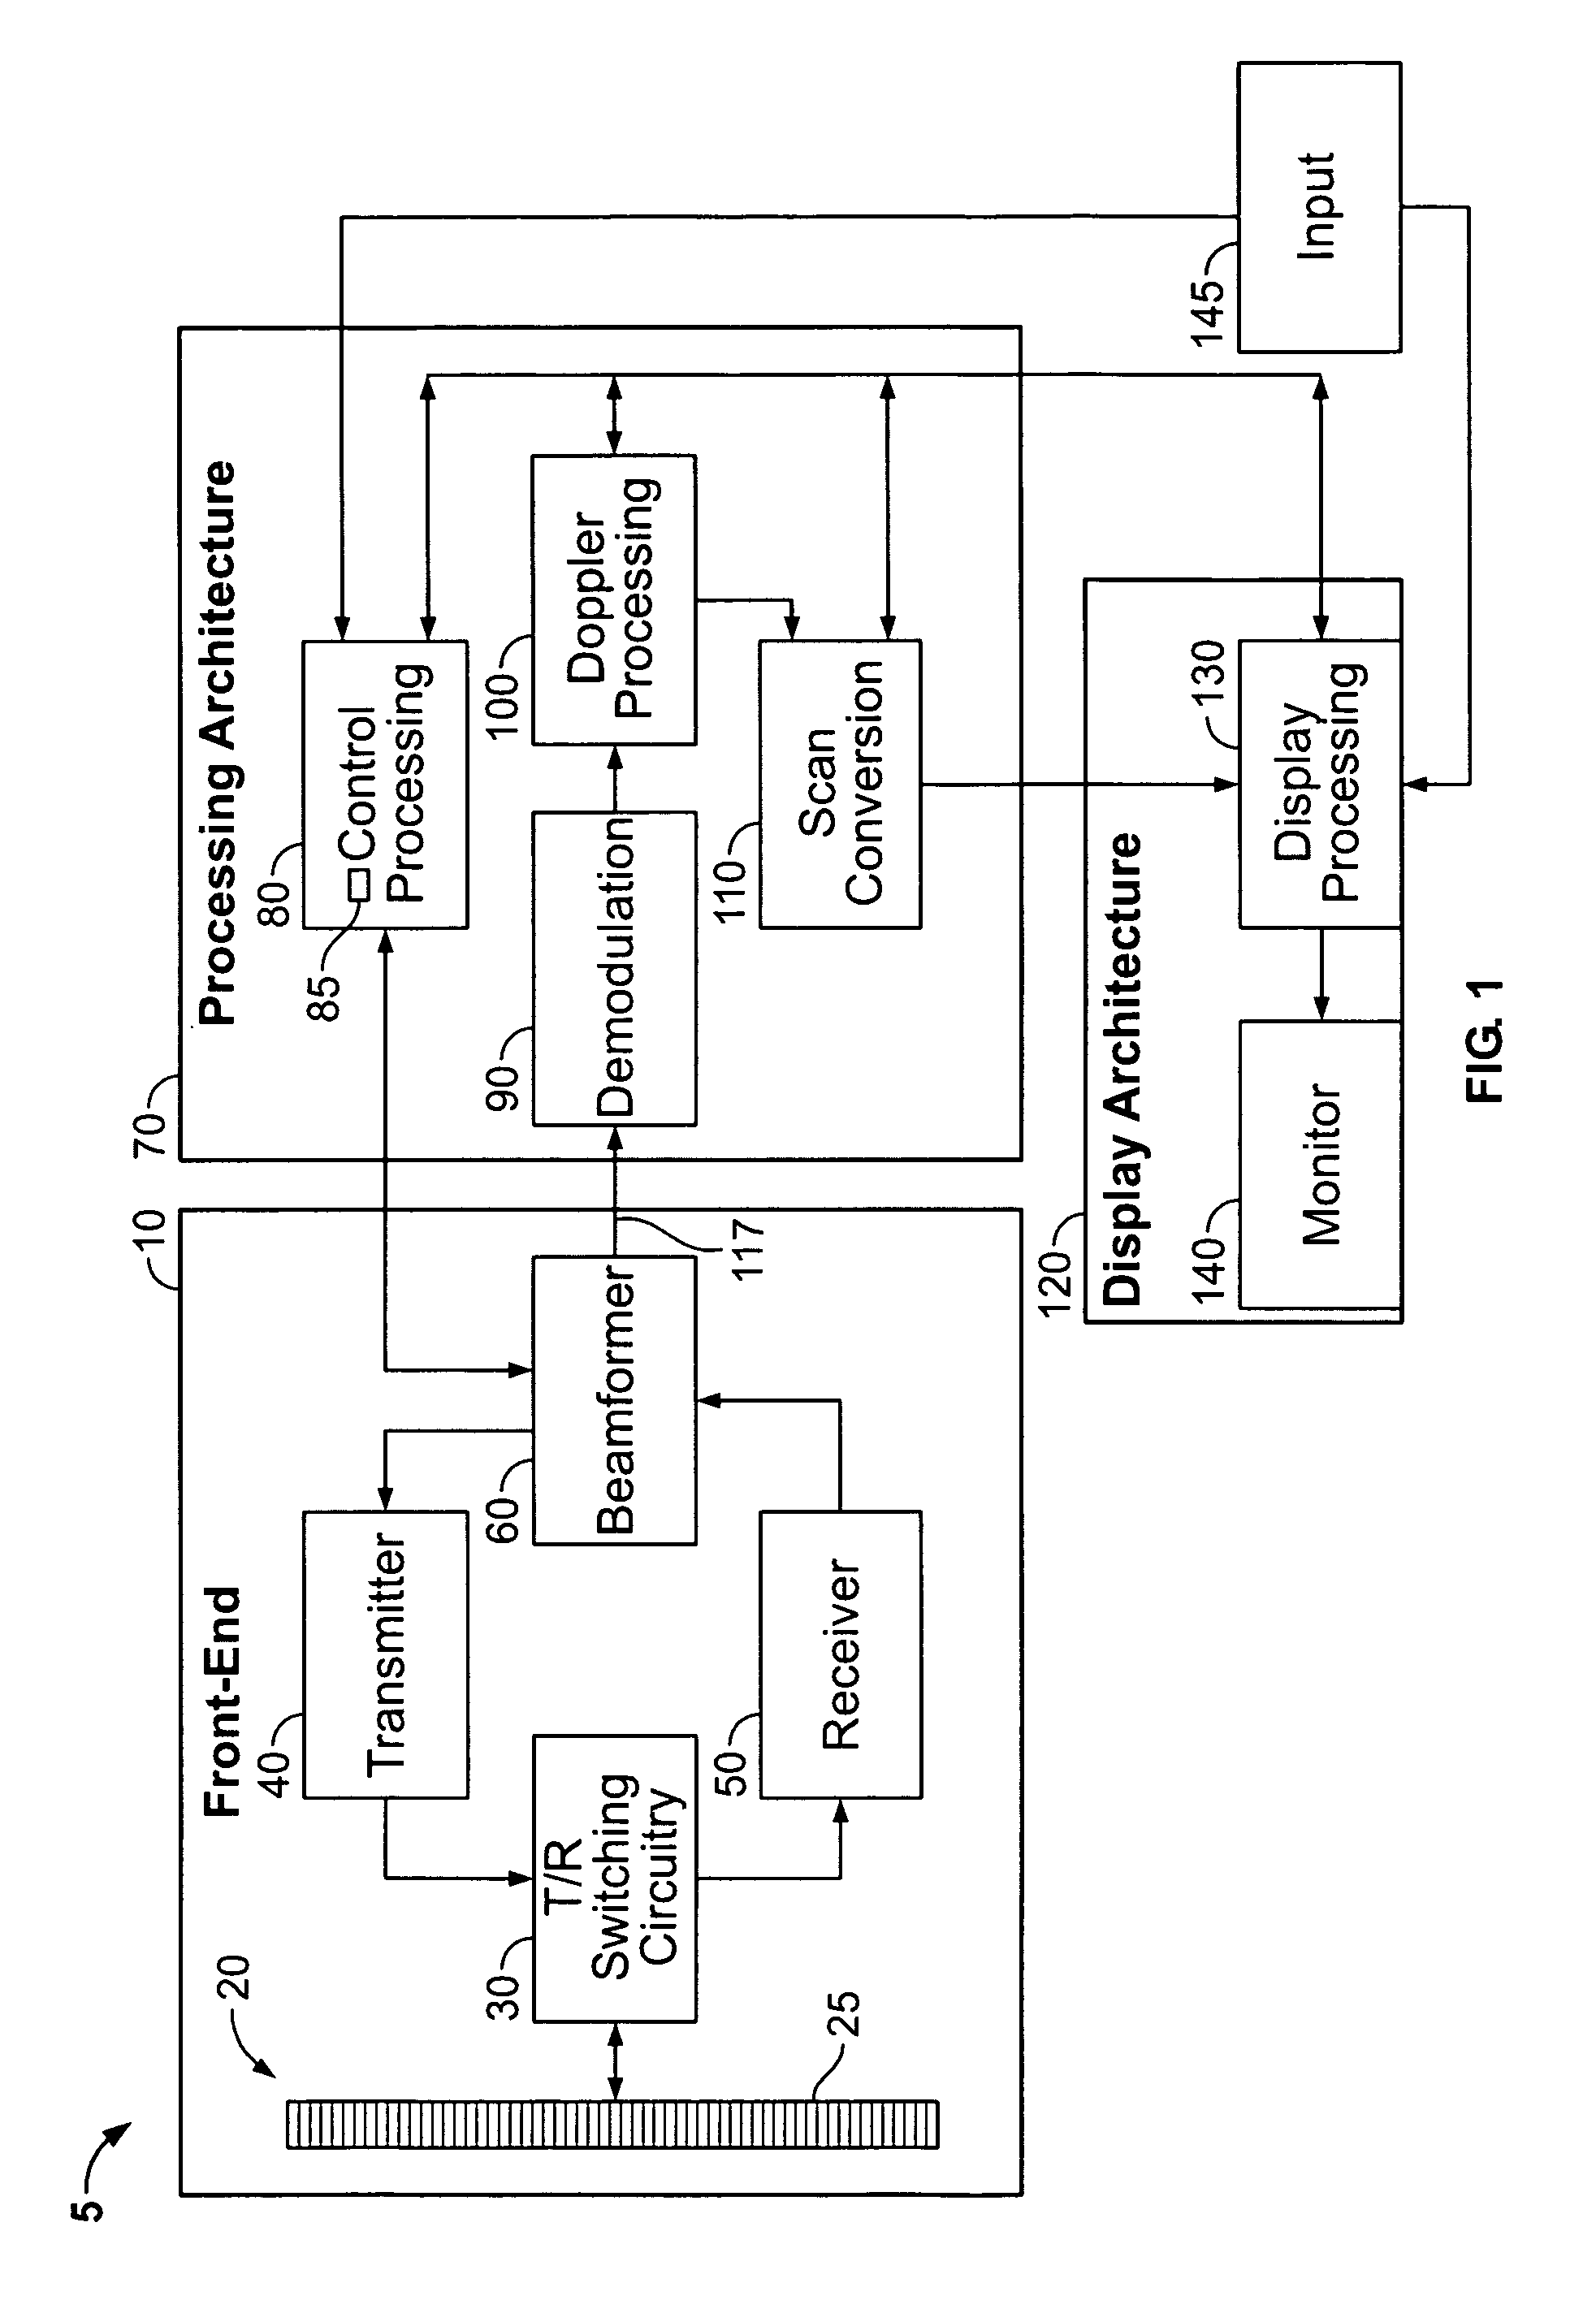 Method and apparatus for automatically adjusting spectral doppler gain